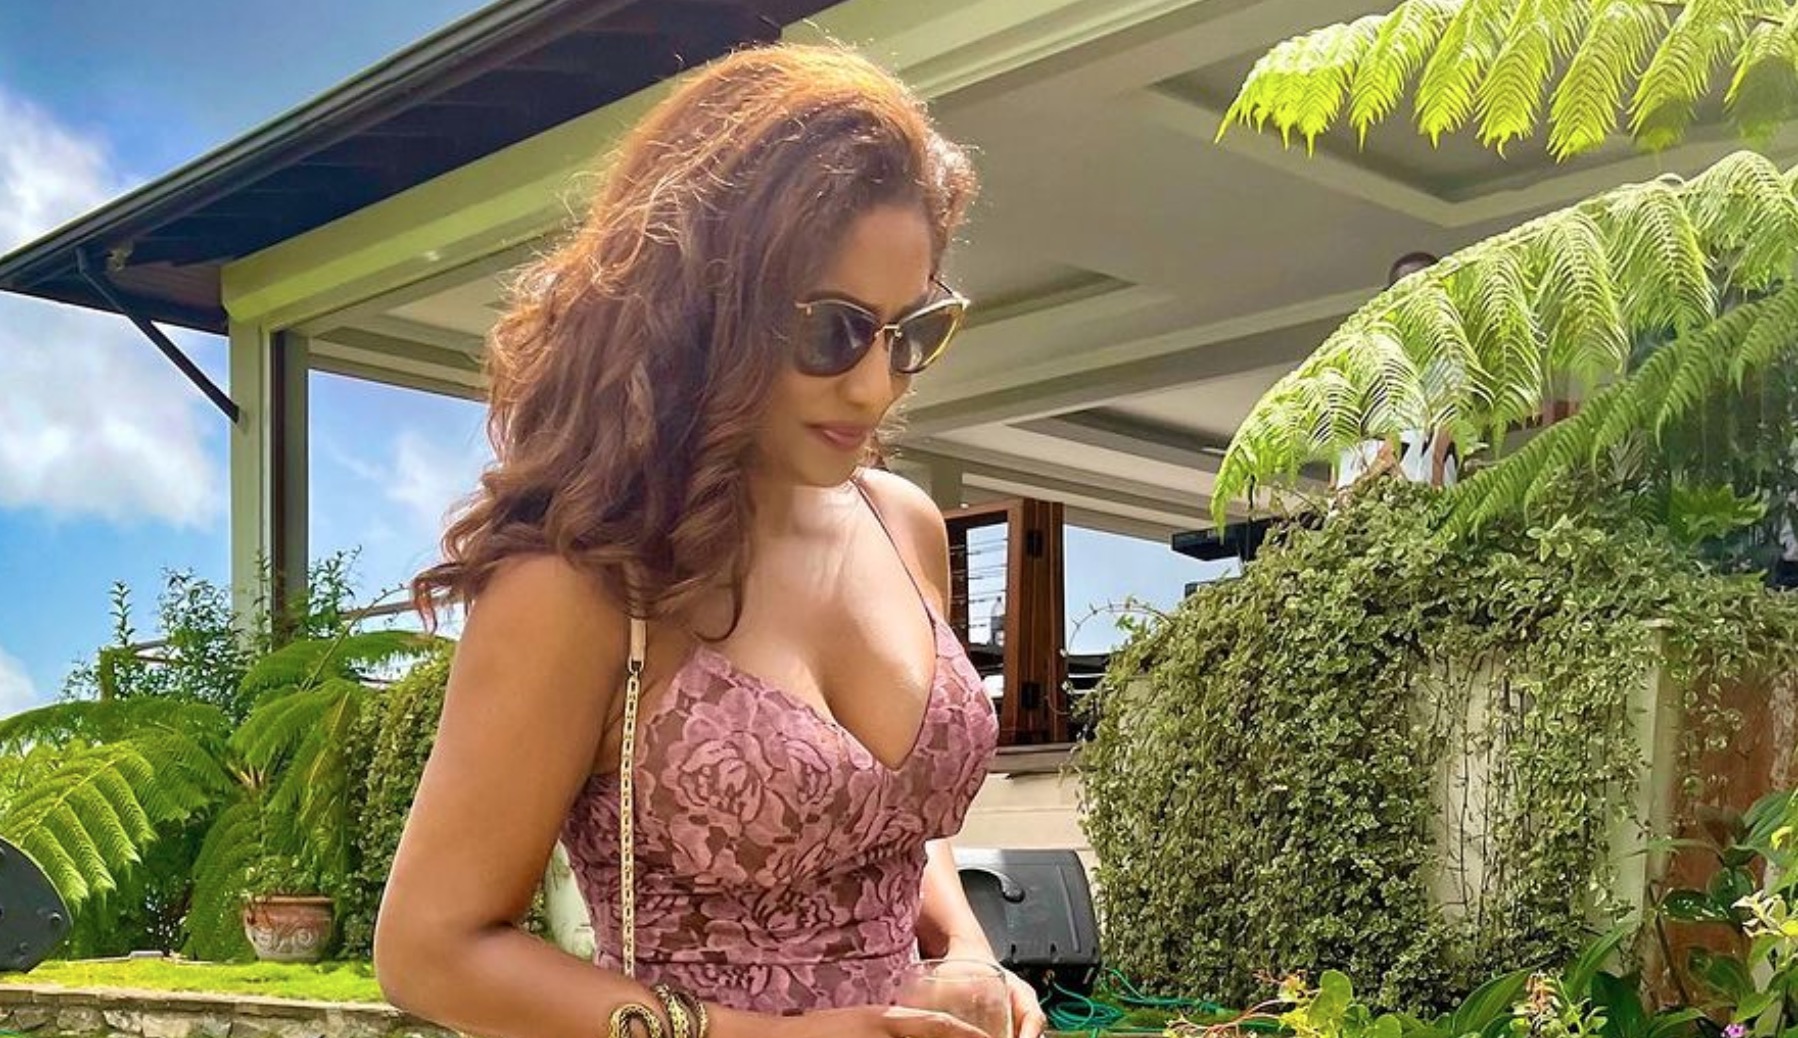 Lisa Hanna Responds to Criticism About Her Clothing Choice: “Unnu Stop Watch Weh Mi A Wear“ – Video